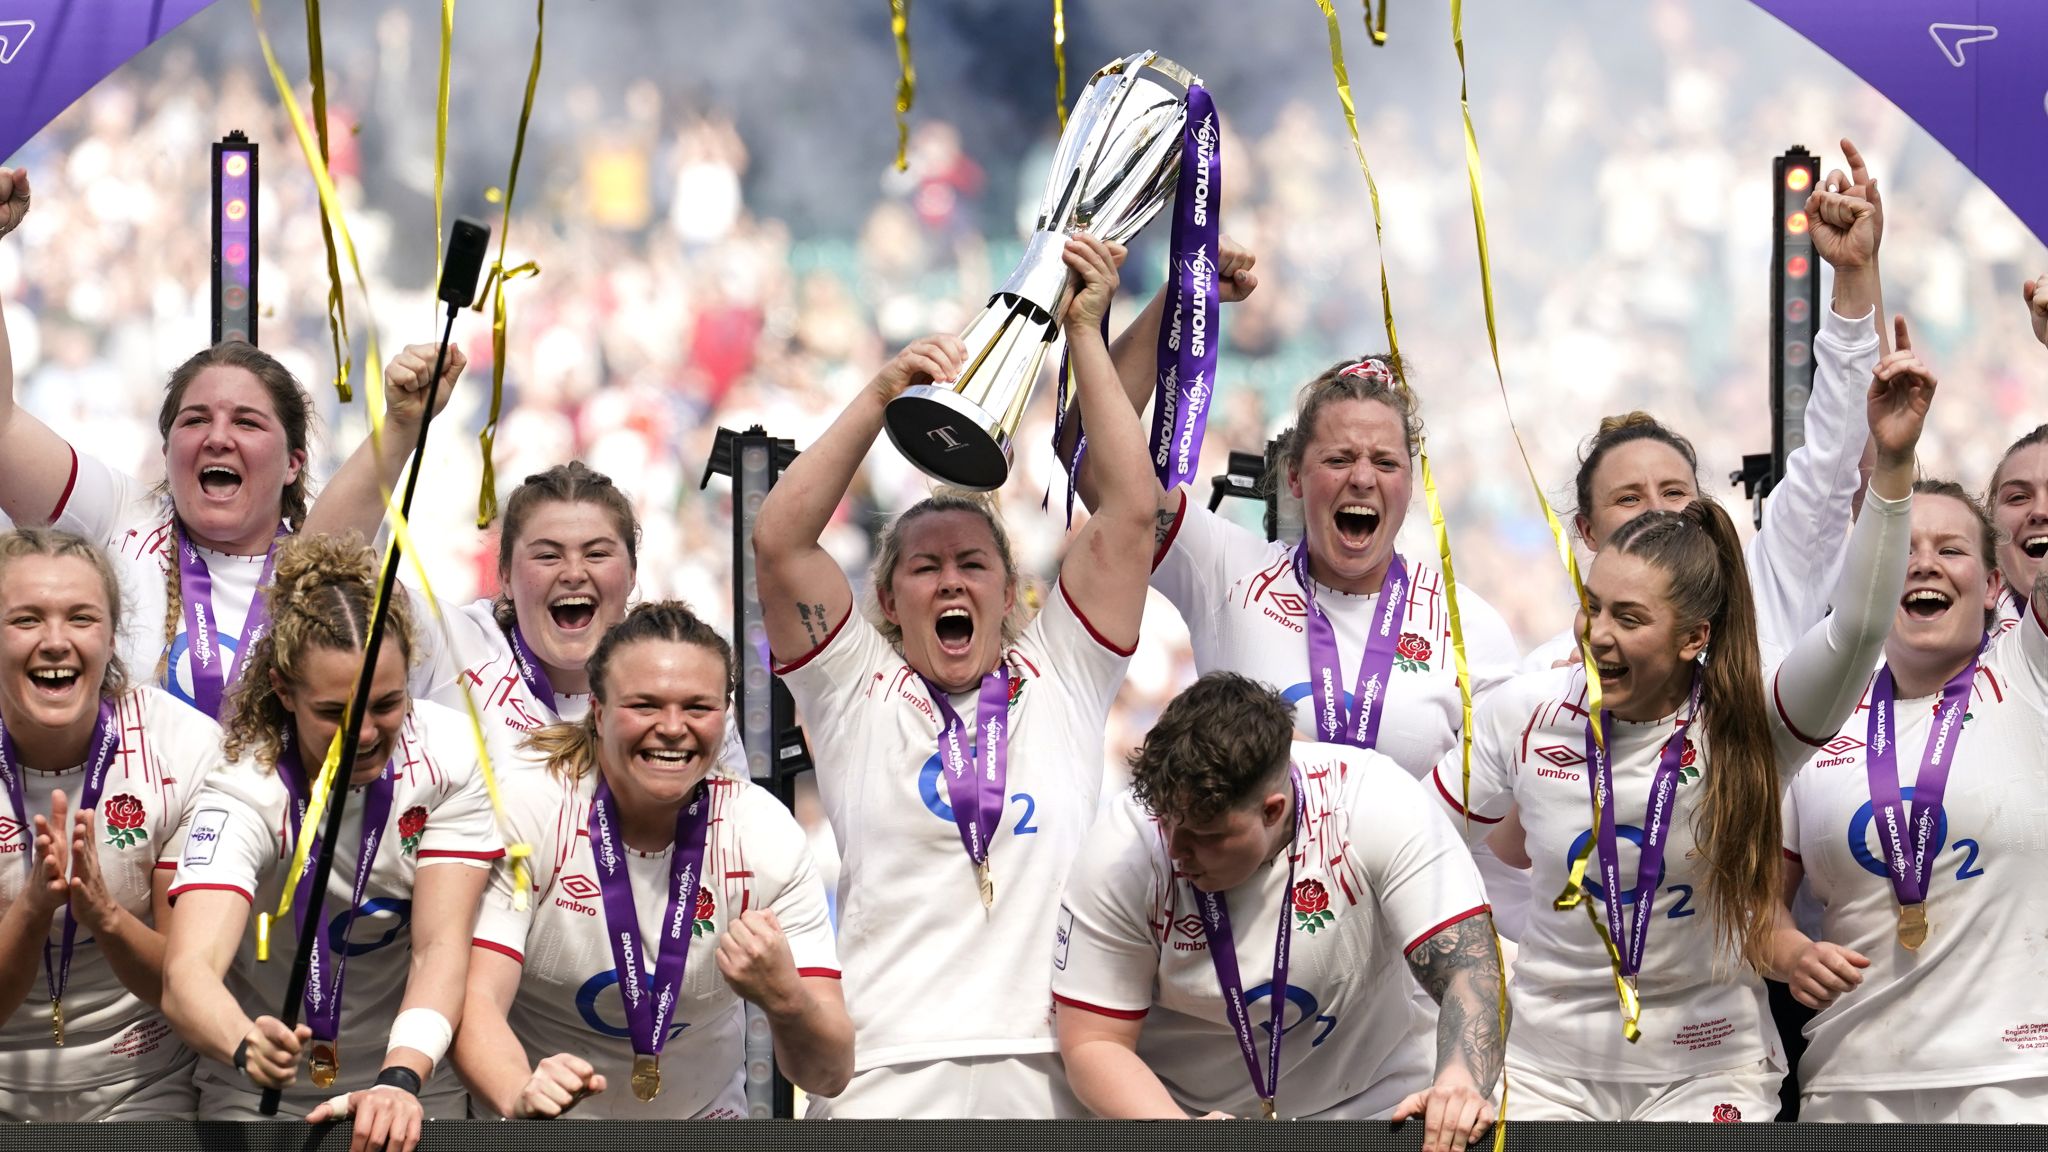 Sports Direct Women's Premiership sees 66% increase in crowds